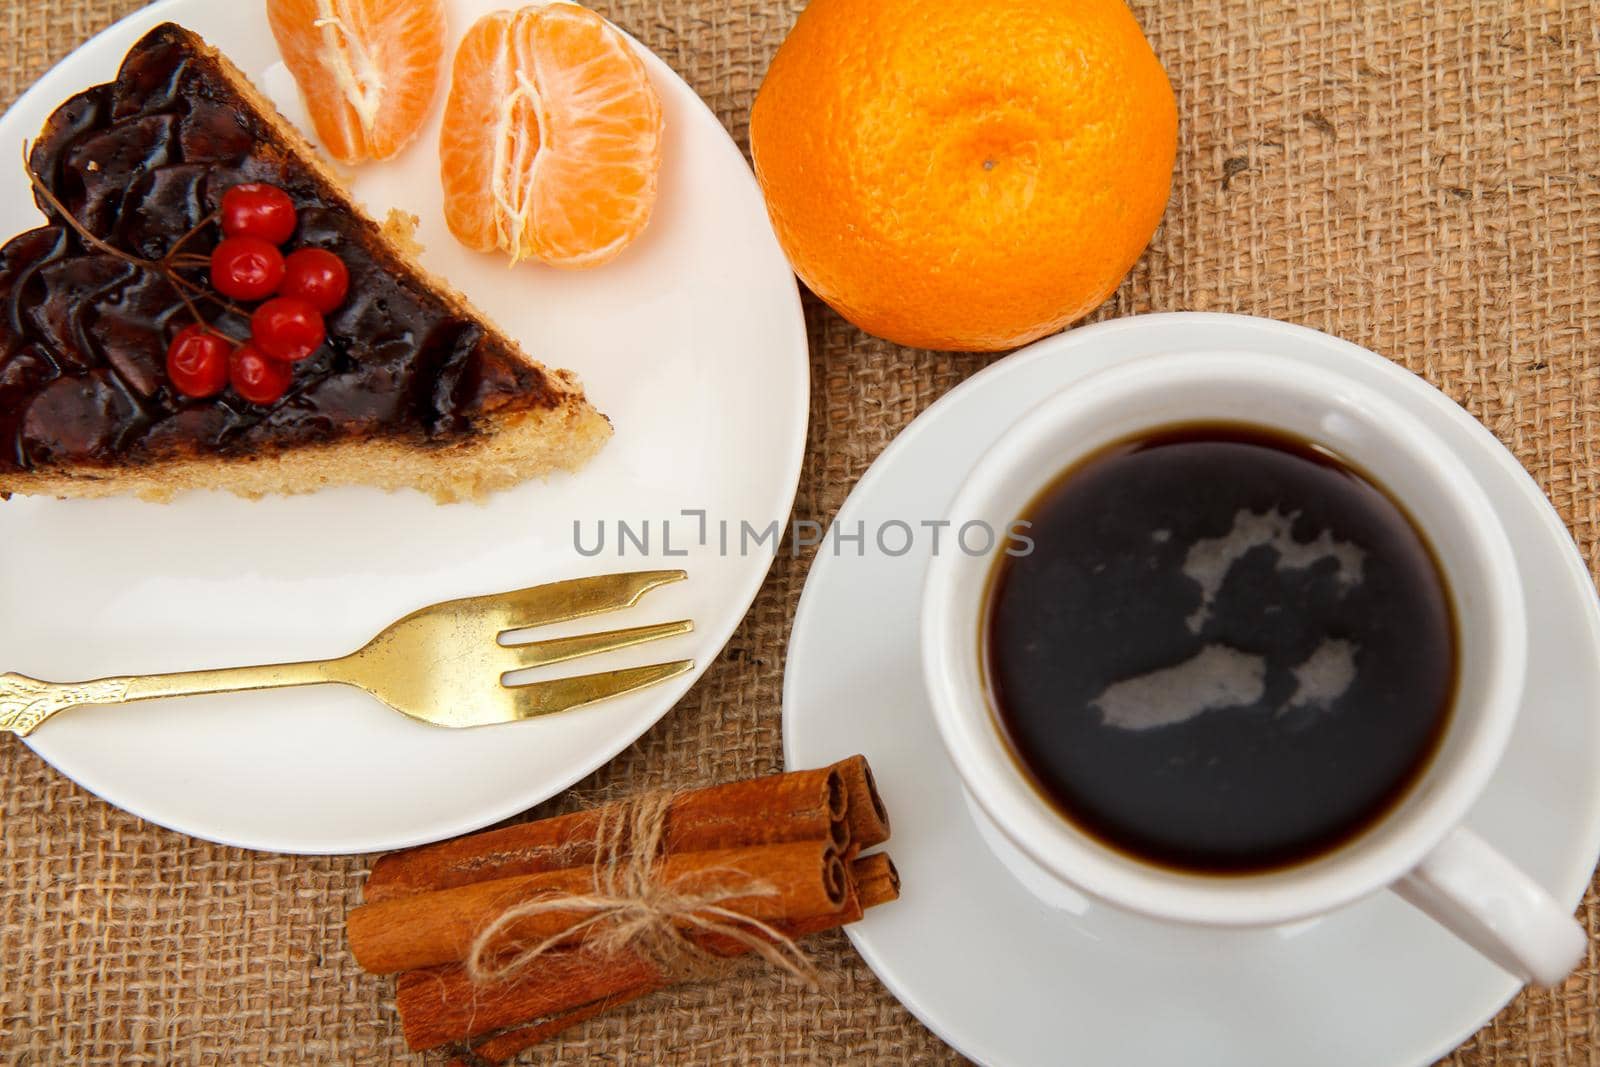 Slice of chocolate cake decorated with bunch of viburnum, fork, cup of coffee, oranges and cinnamon on table with sackcloth. Top view